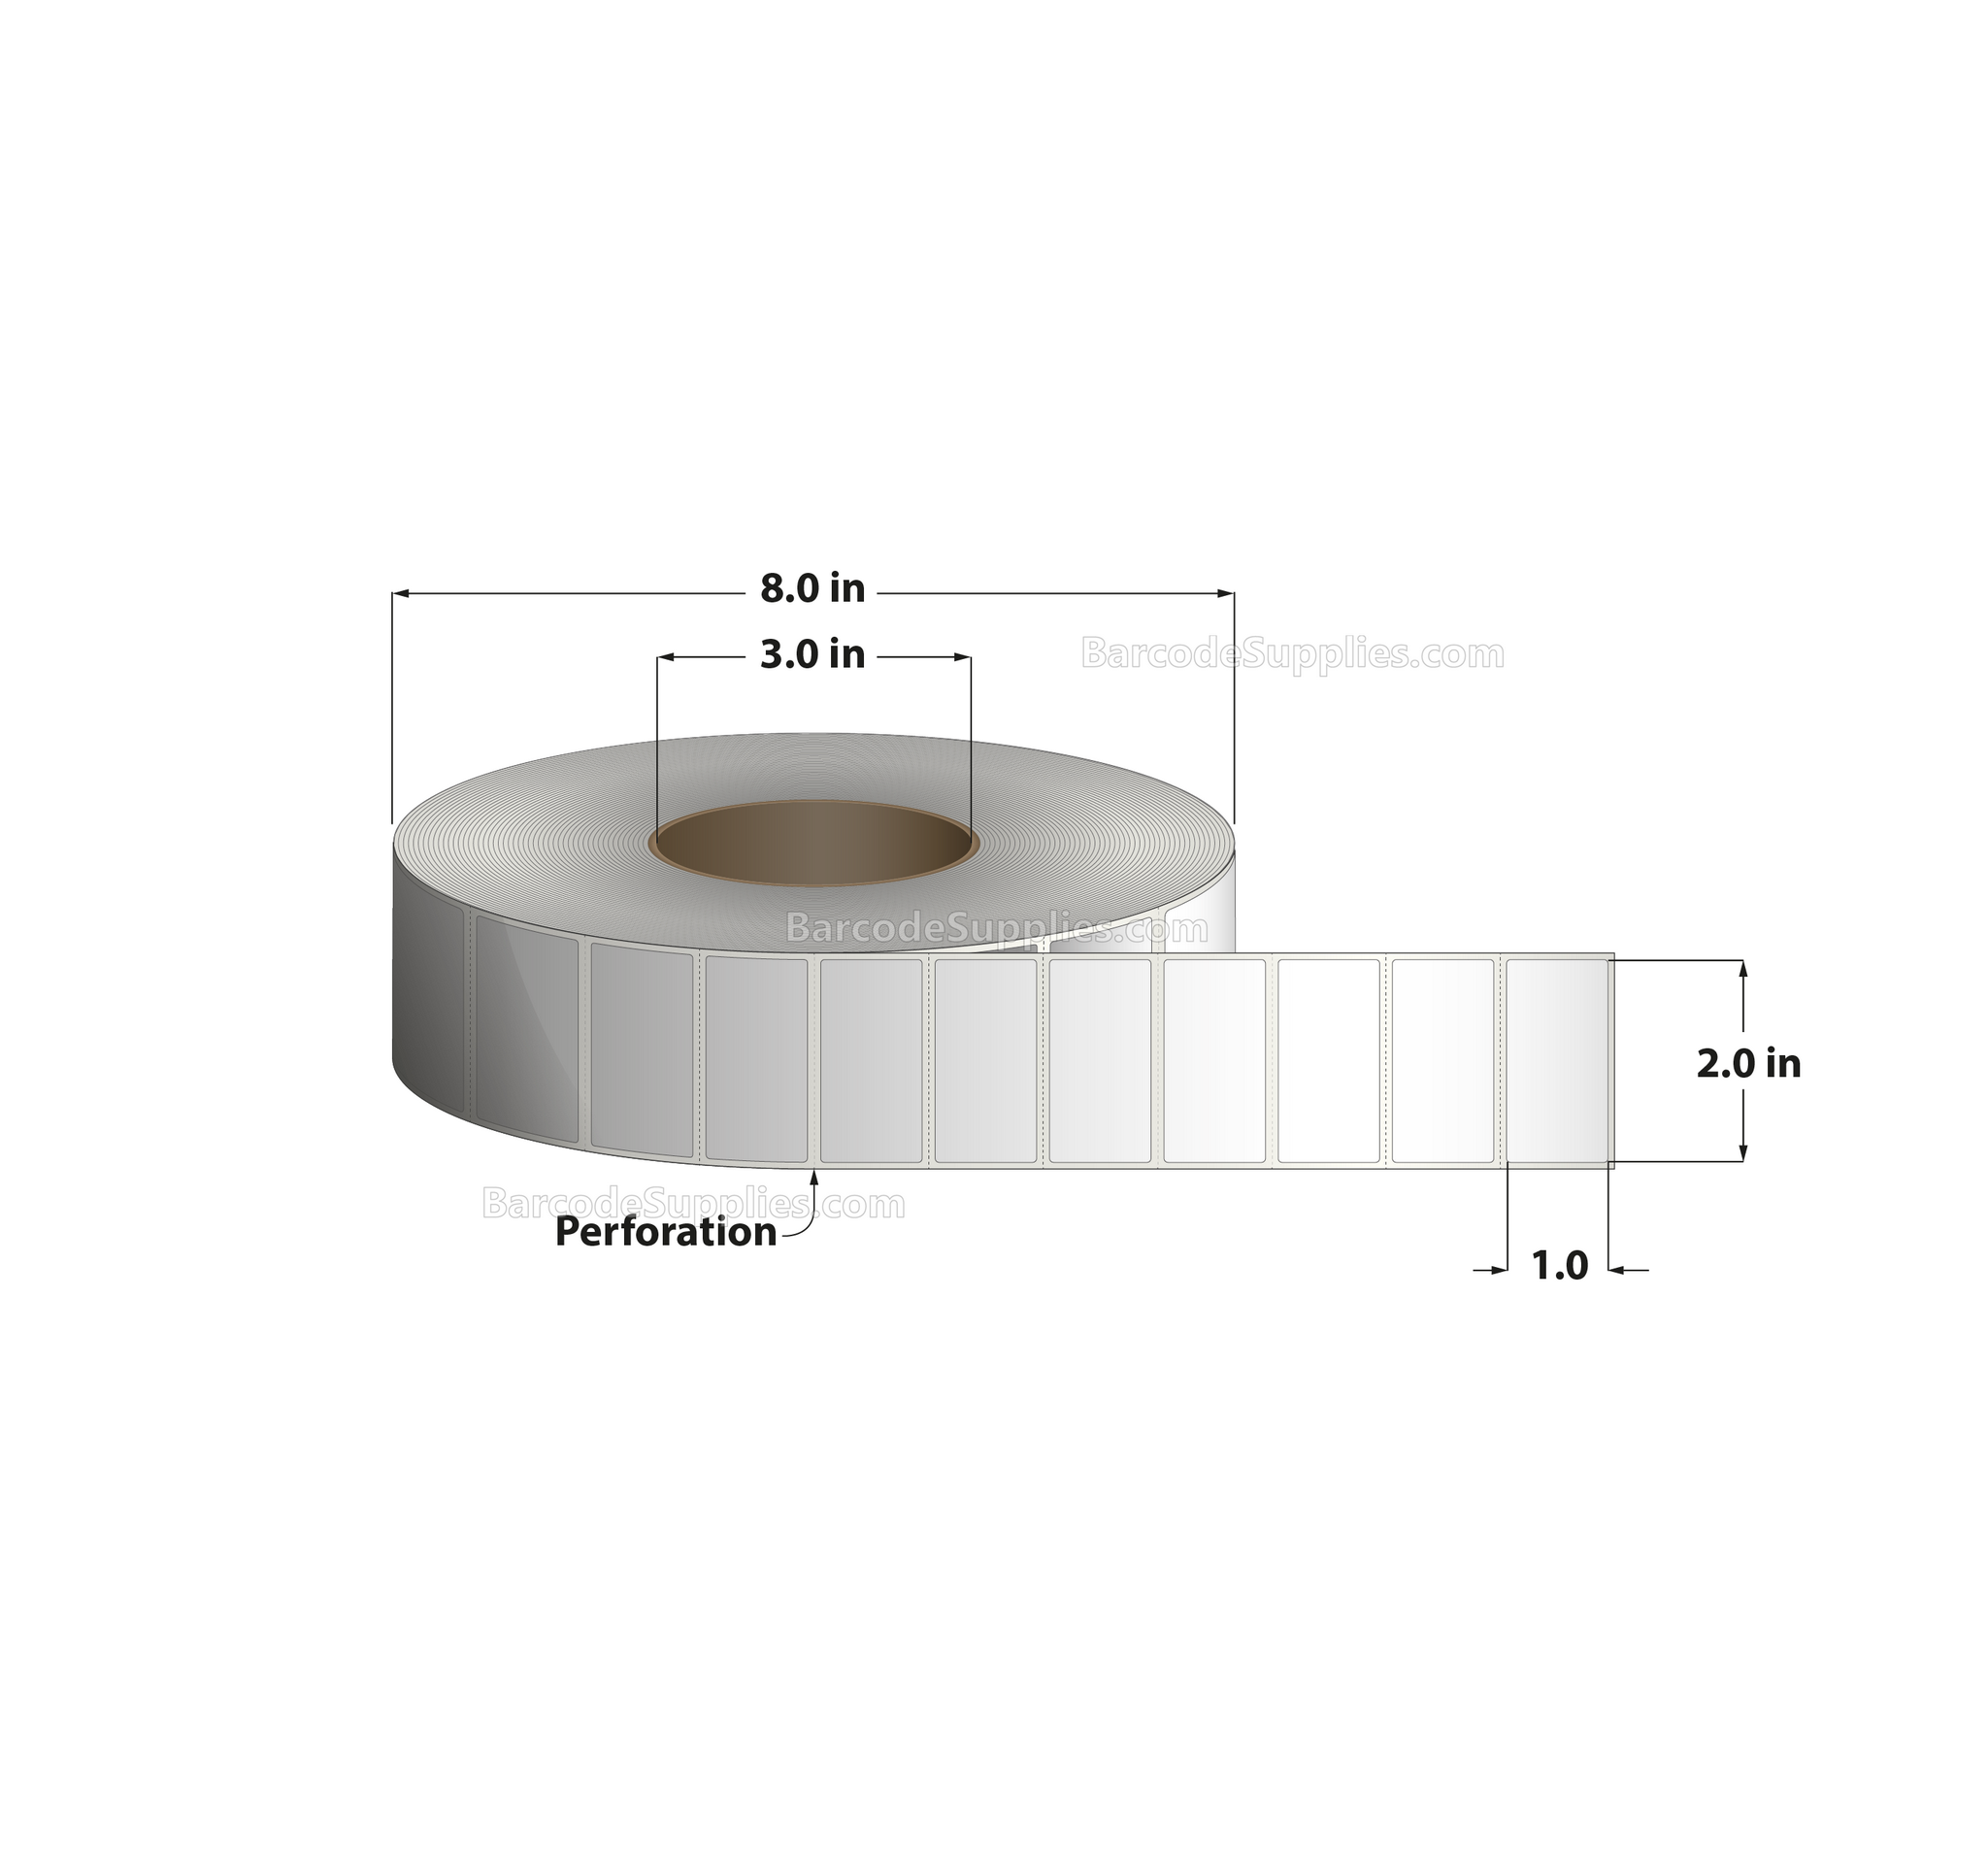 2 x 1 Thermal Transfer White Labels With Permanent Adhesive - Perforated - 5150 Labels Per Roll - Carton Of 8 Rolls - 41200 Labels Total - MPN: RK-2-1-5150-3